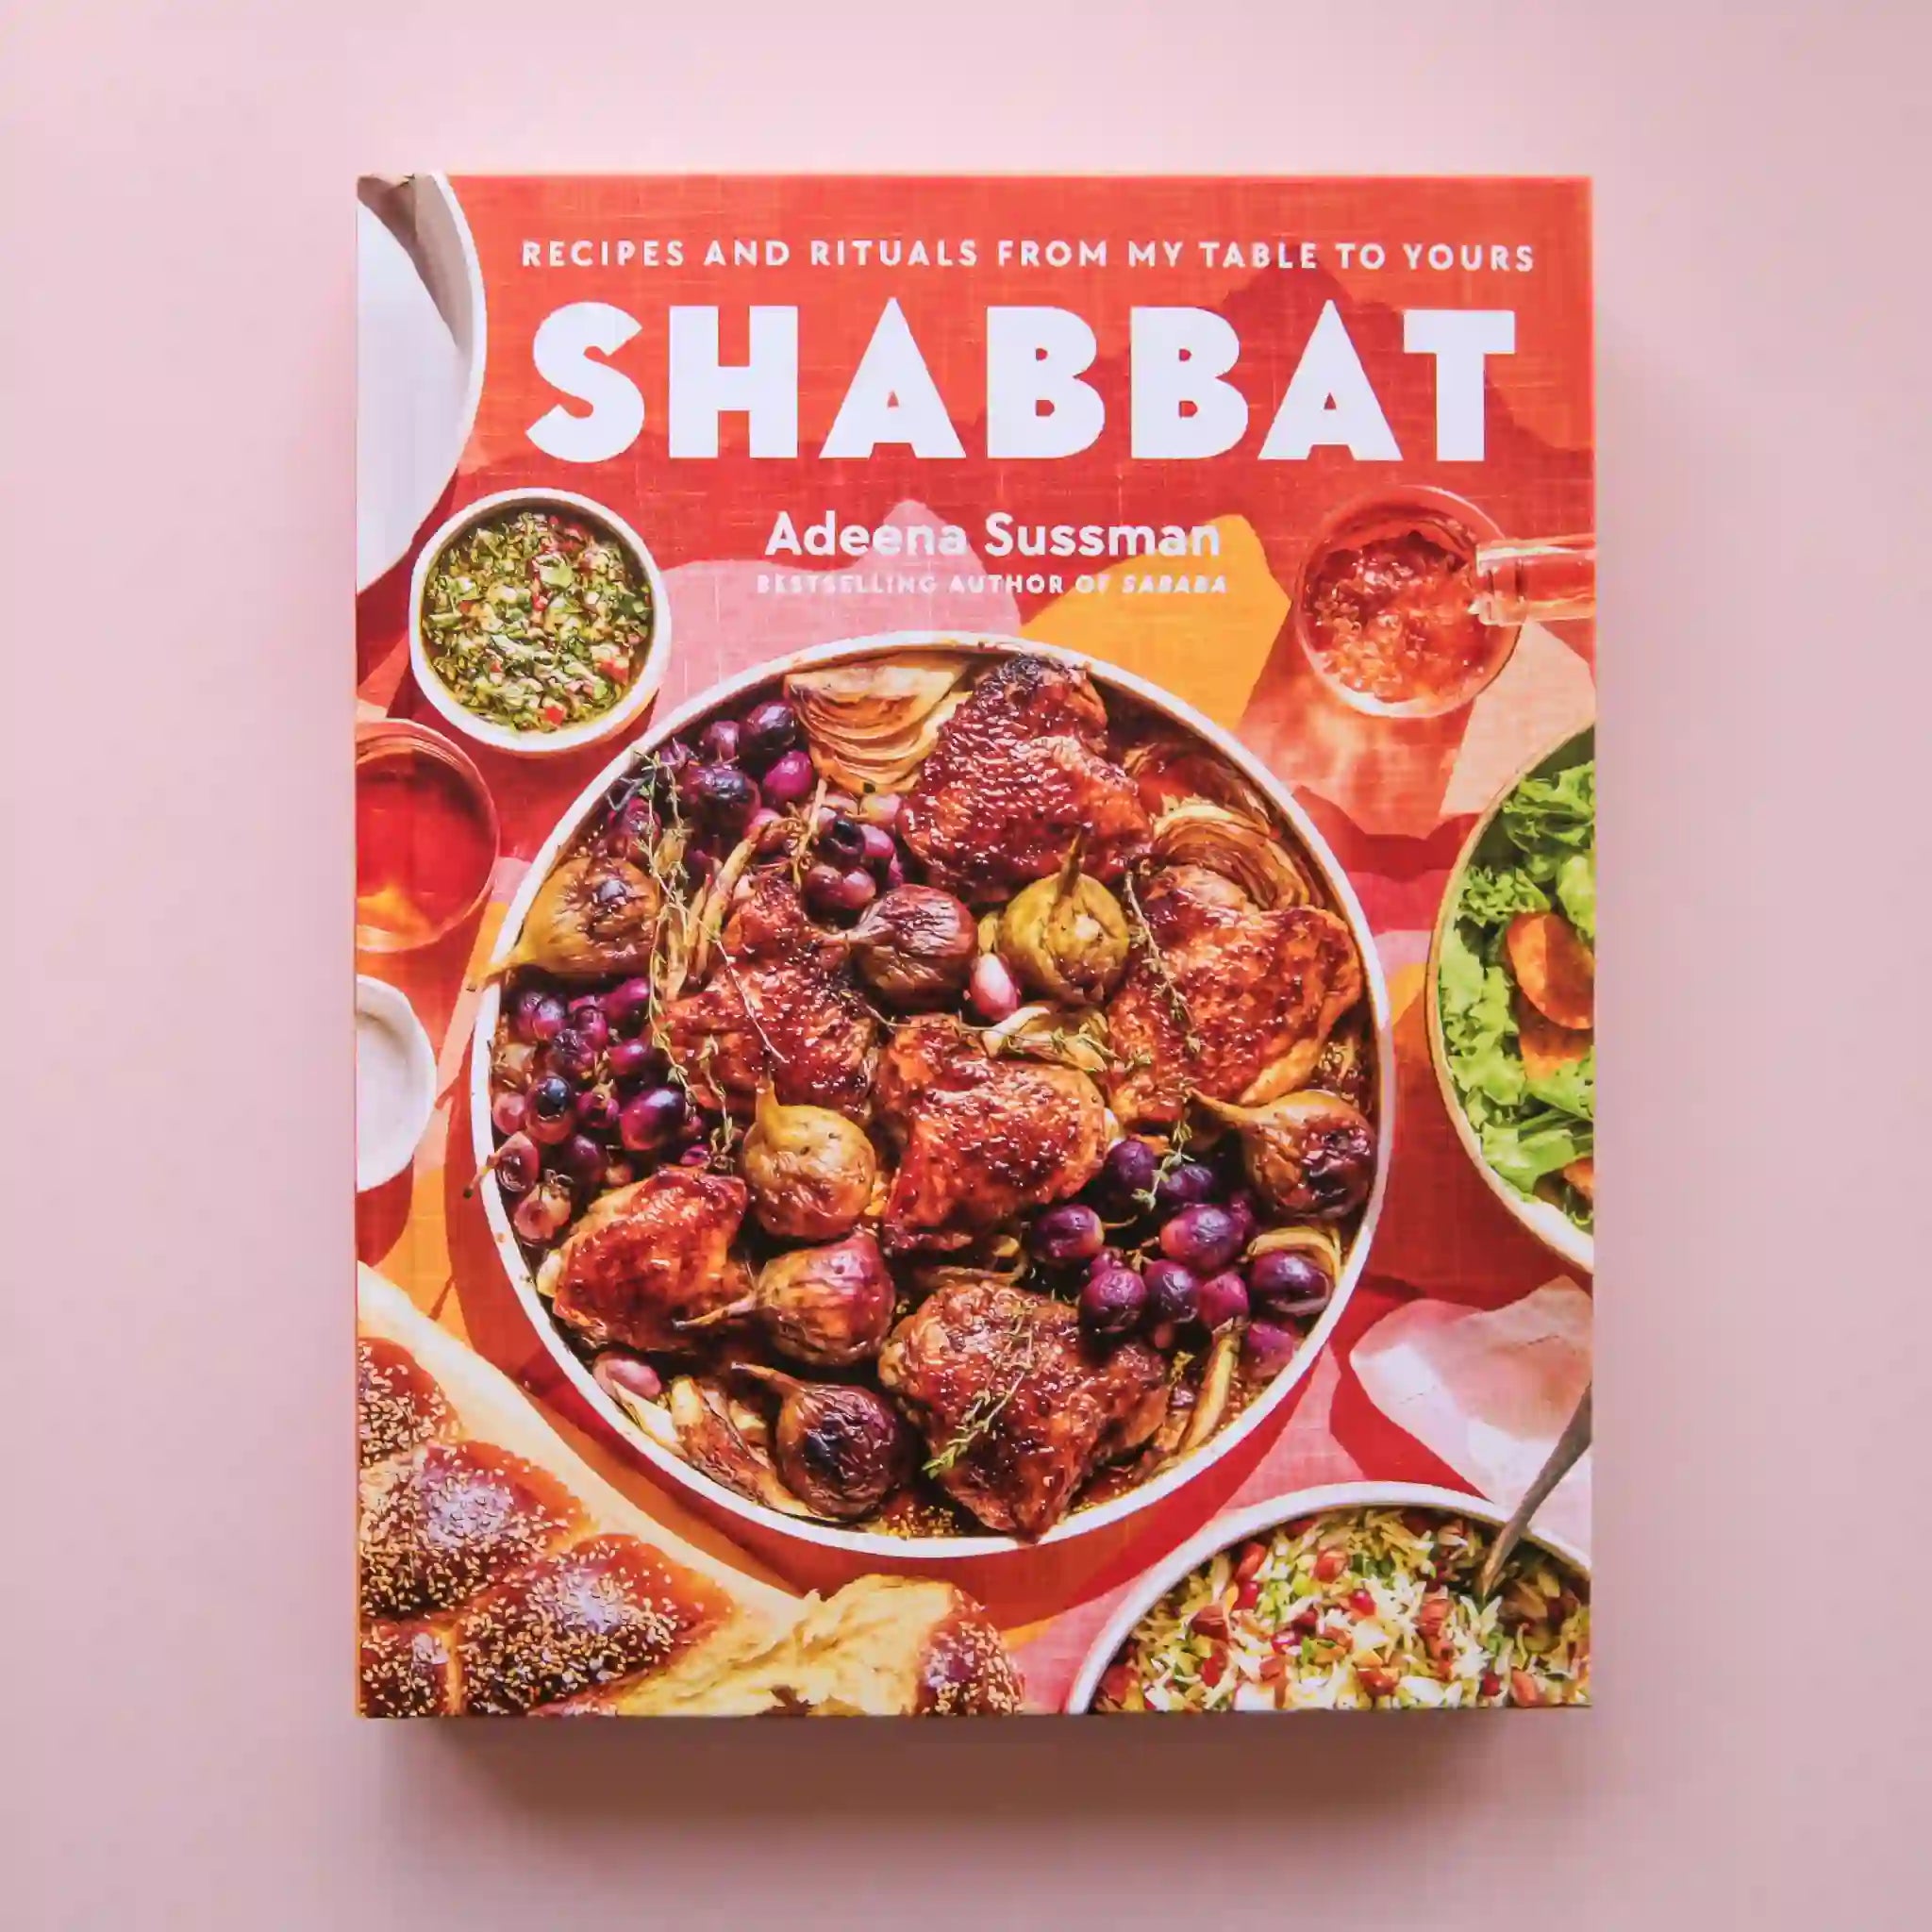 On a pink background is a colorful book cover with a big family style meal with white text at the top that reads, "Recipes and RItuals From My Table To Yours Shabbat".